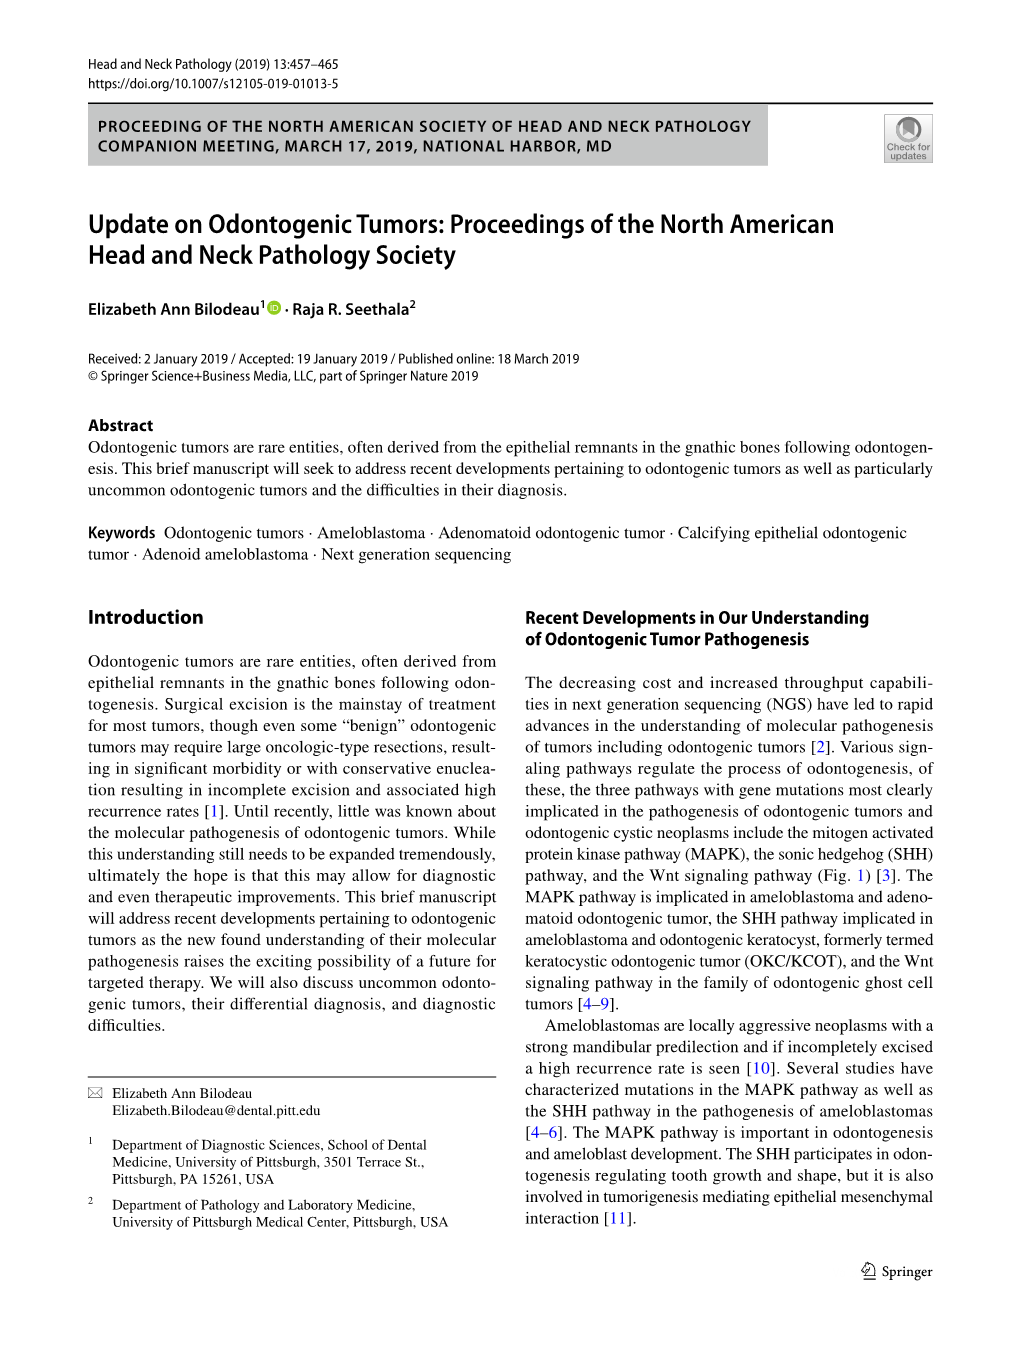 Update on Odontogenic Tumors: Proceedings of the North American Head and Neck Pathology Society